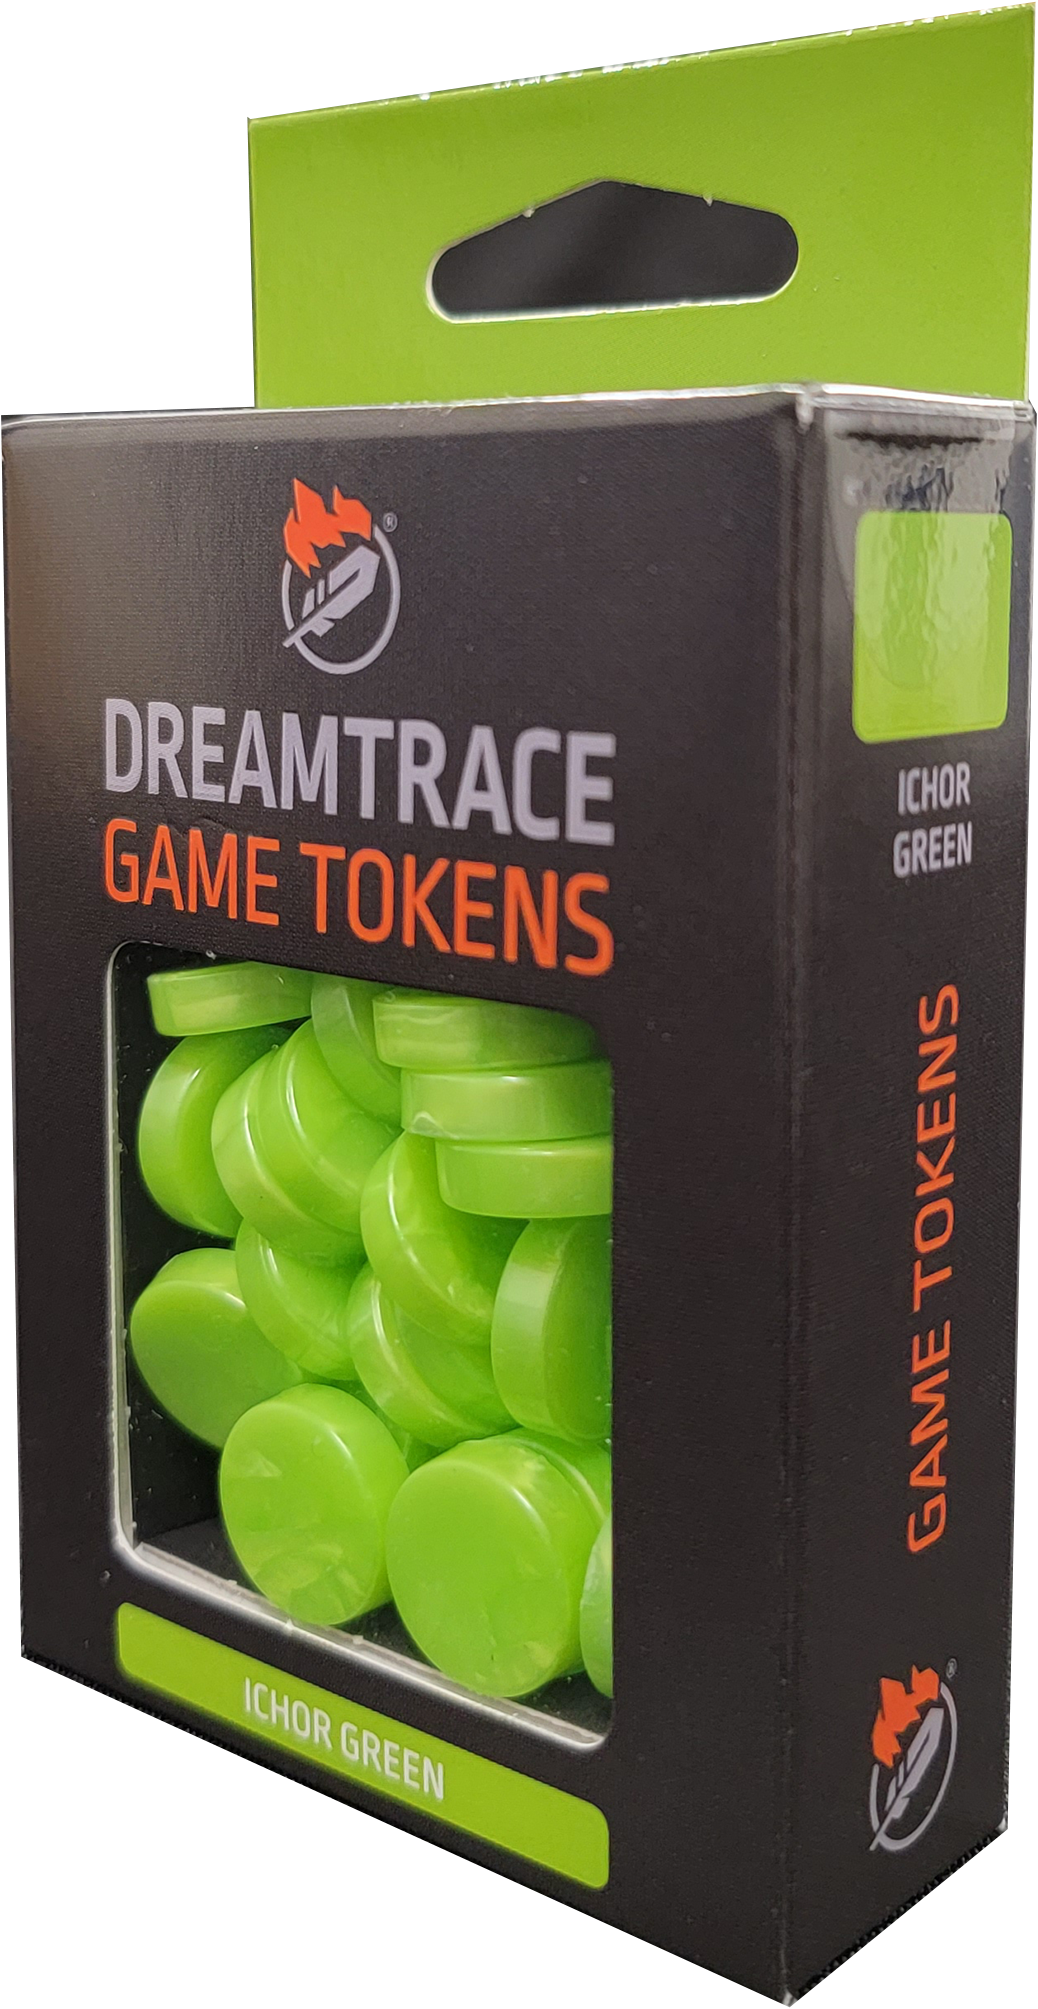 Dreamtrace Gaming Tokens: Ichor Green 